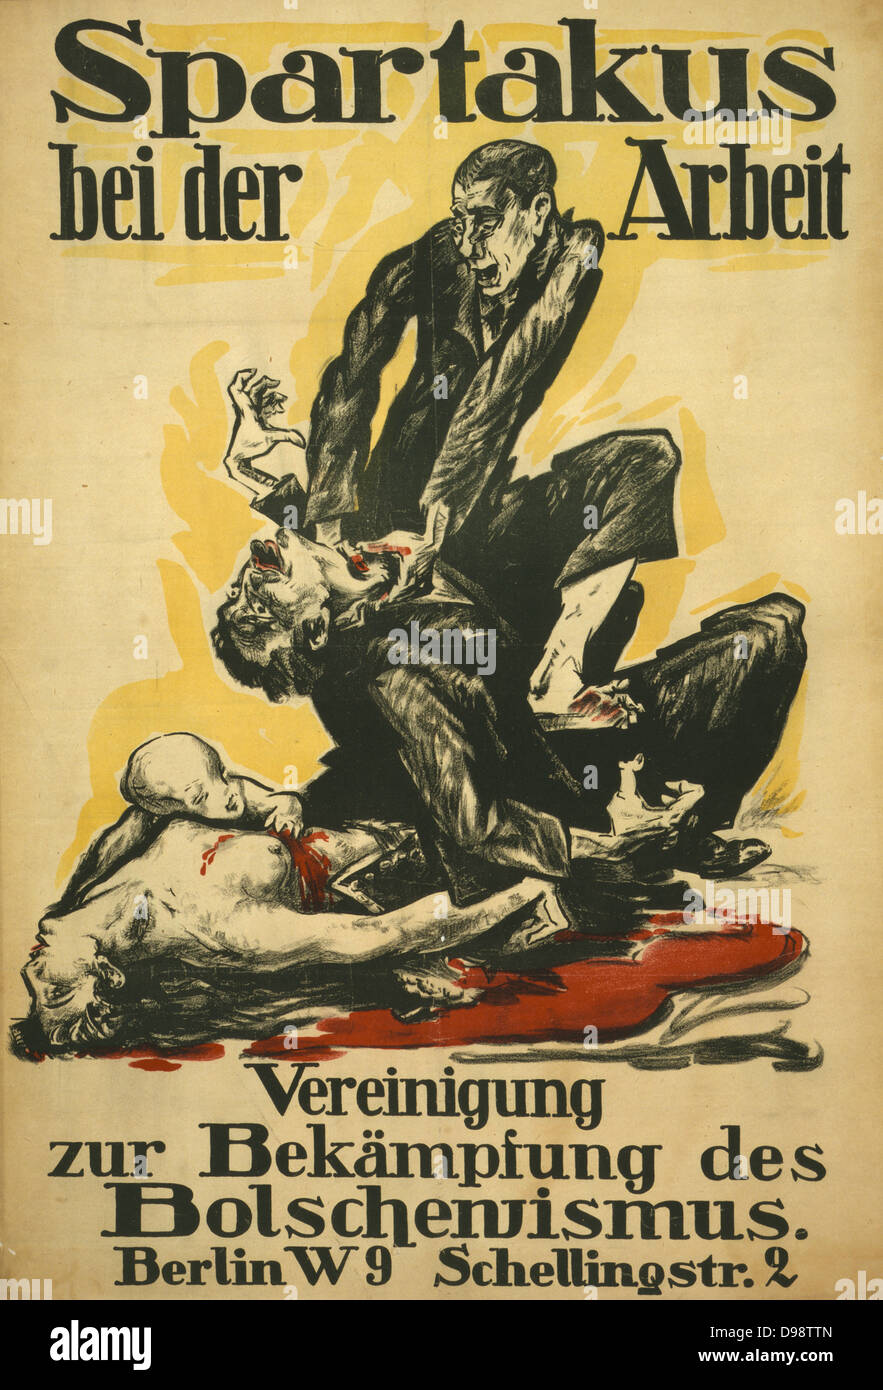 German political poster, 1919. 'Spartakus at work', showing a member the communist Spartacus League murdering a family. Fear of Bolsheviks widespread in Germany at this time. Anti-Communist Anti-Bolshevik Propaganda Stock Photo